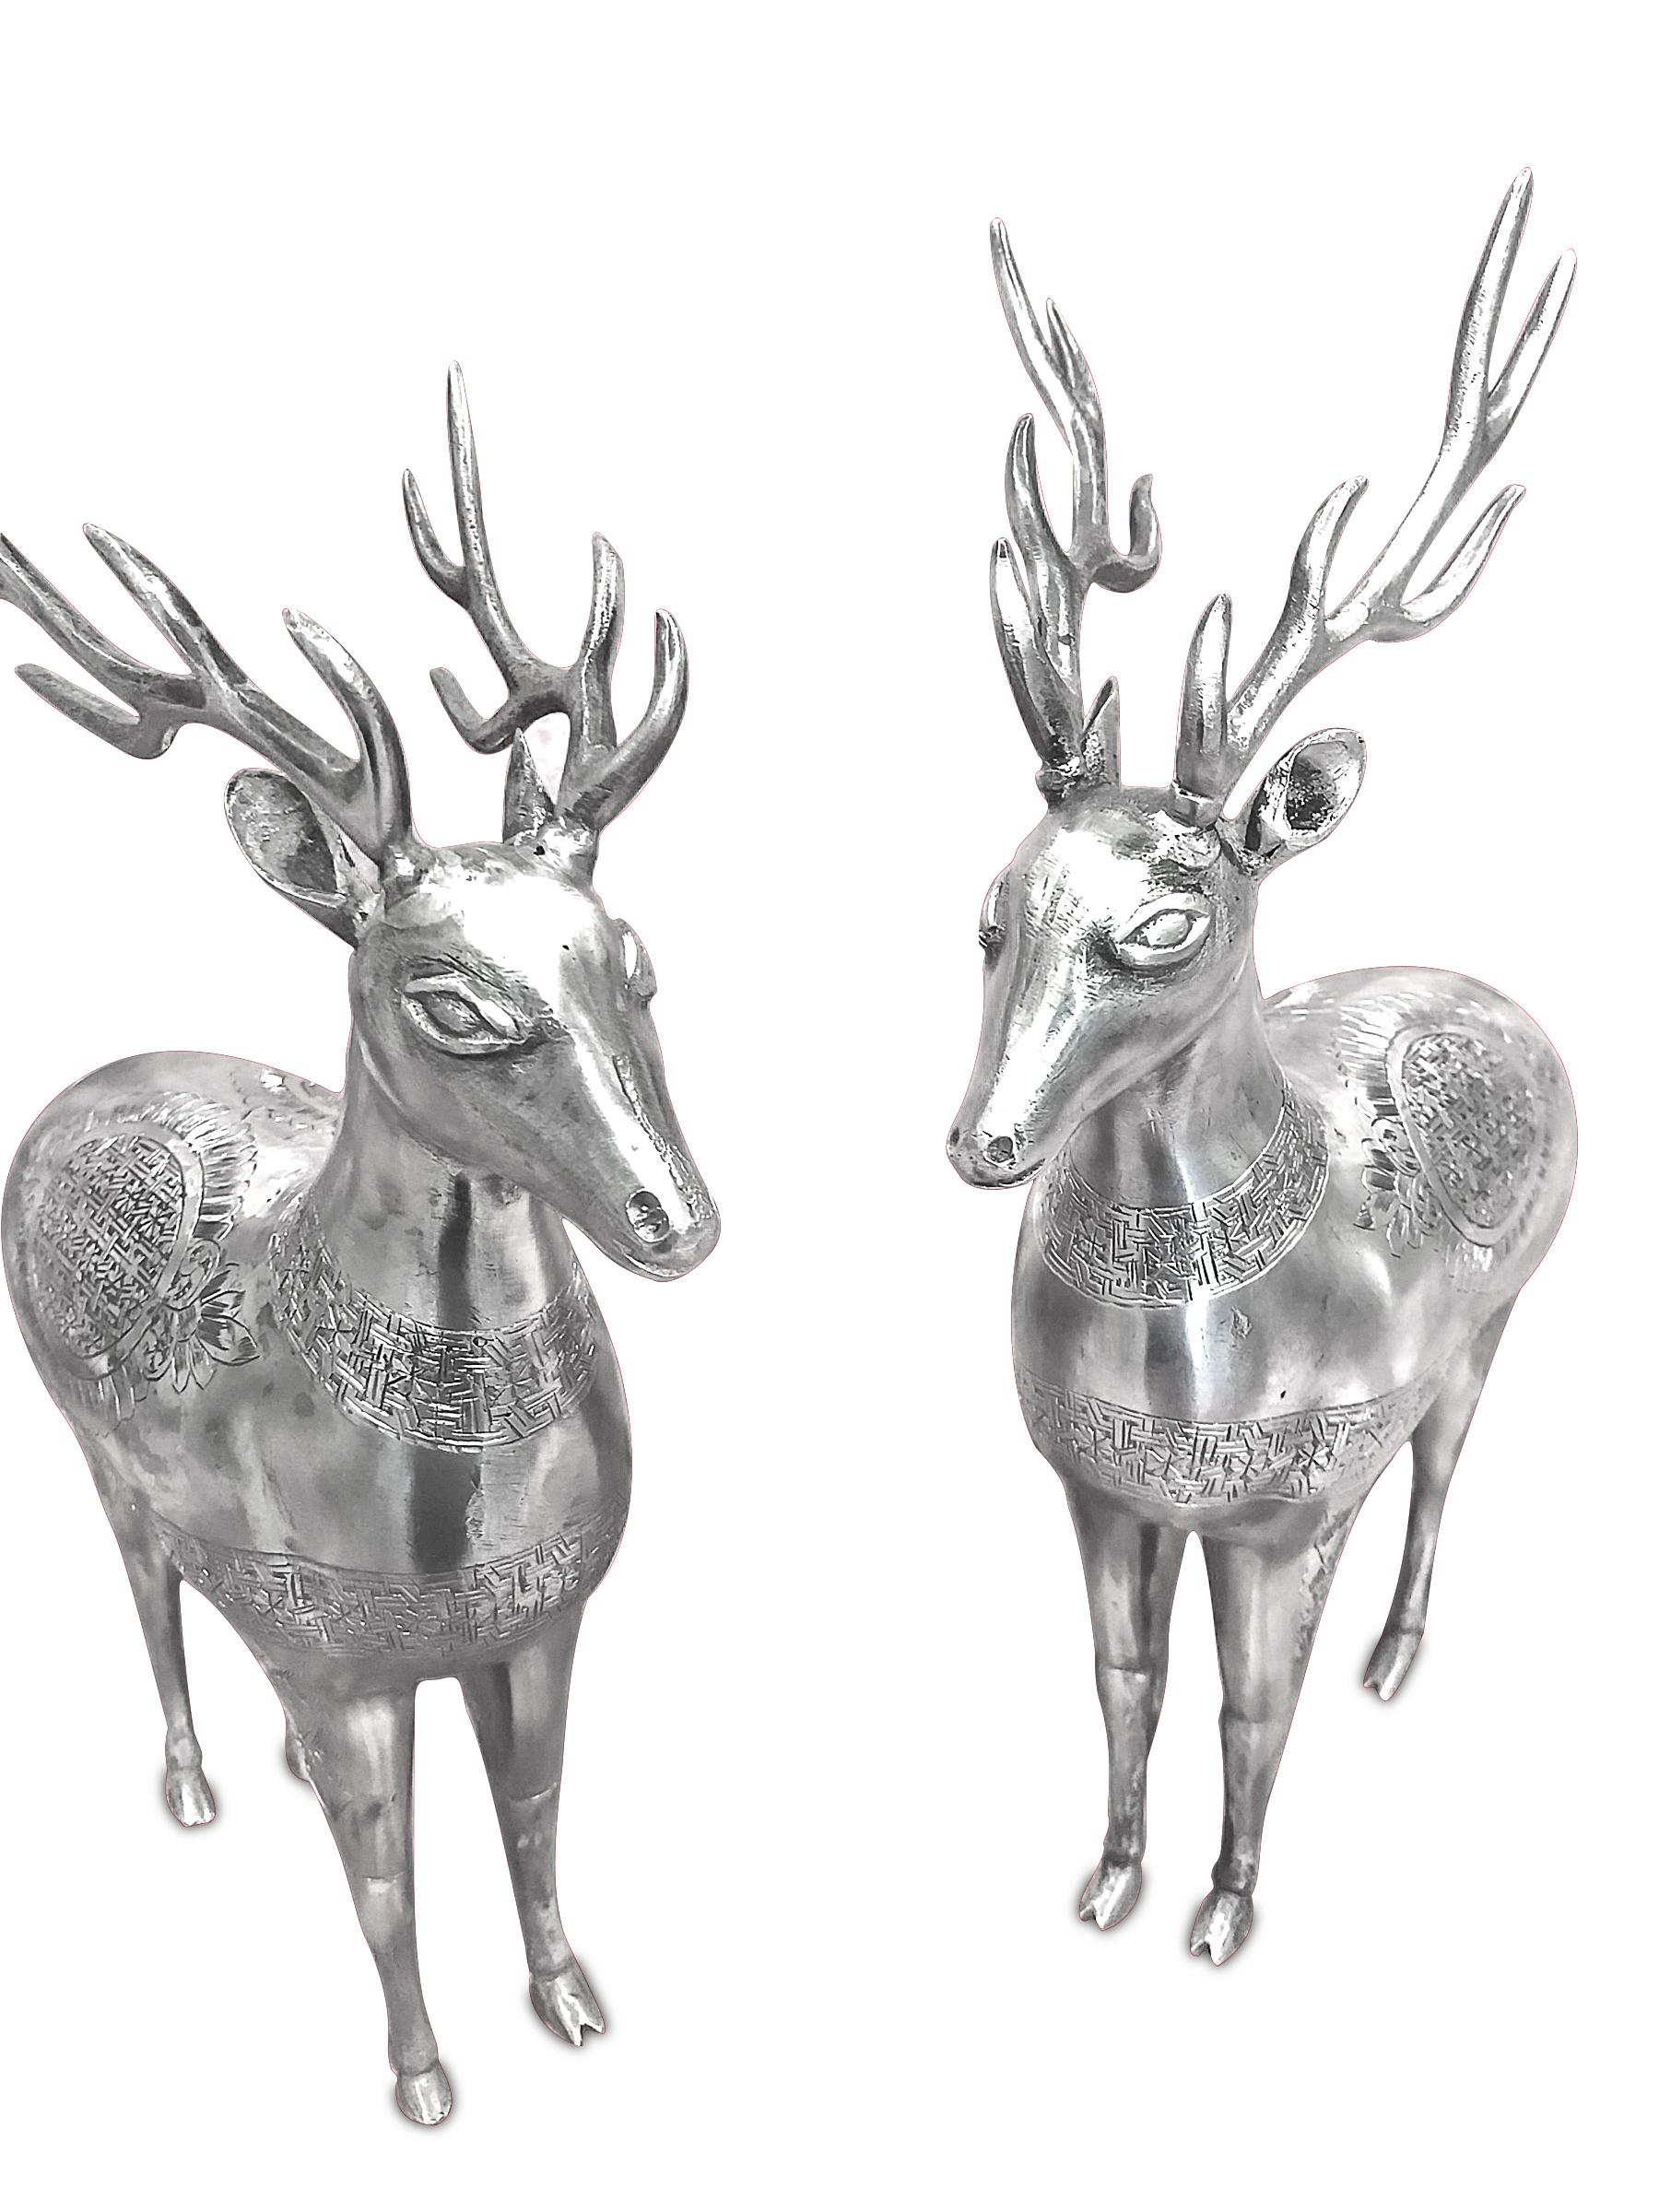 Women's or Men's Antique, Gorgeous, Rare Pair of Deer Figurines in Silver, Handmade, Persian For Sale